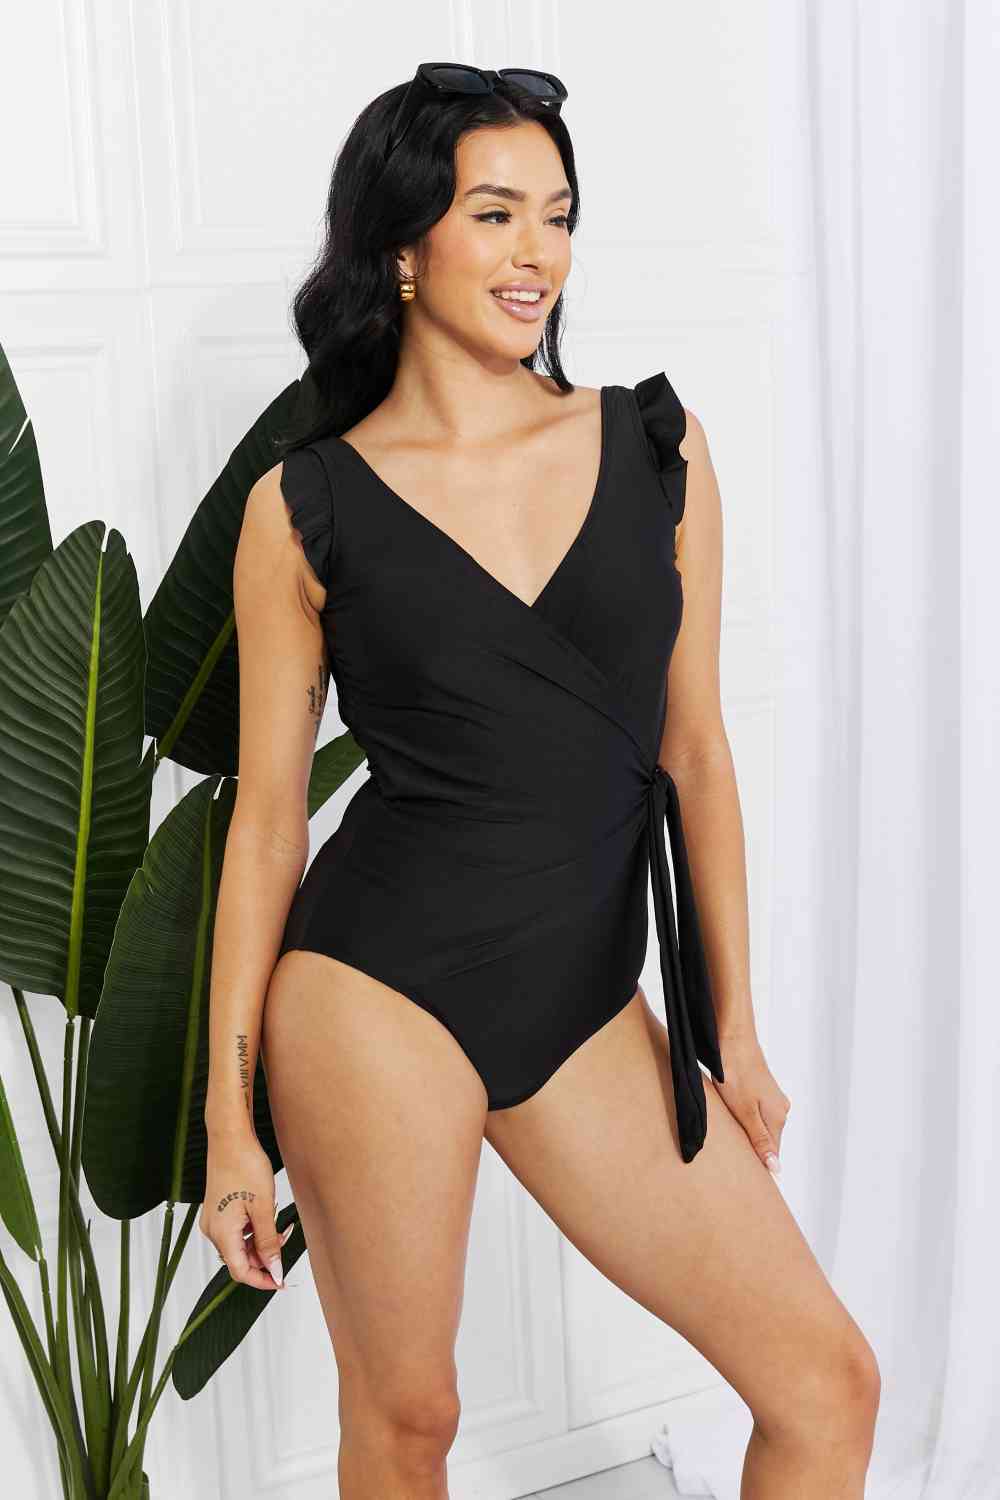 Women's Black One Piece Swimsuit with Ruffle and Open Back